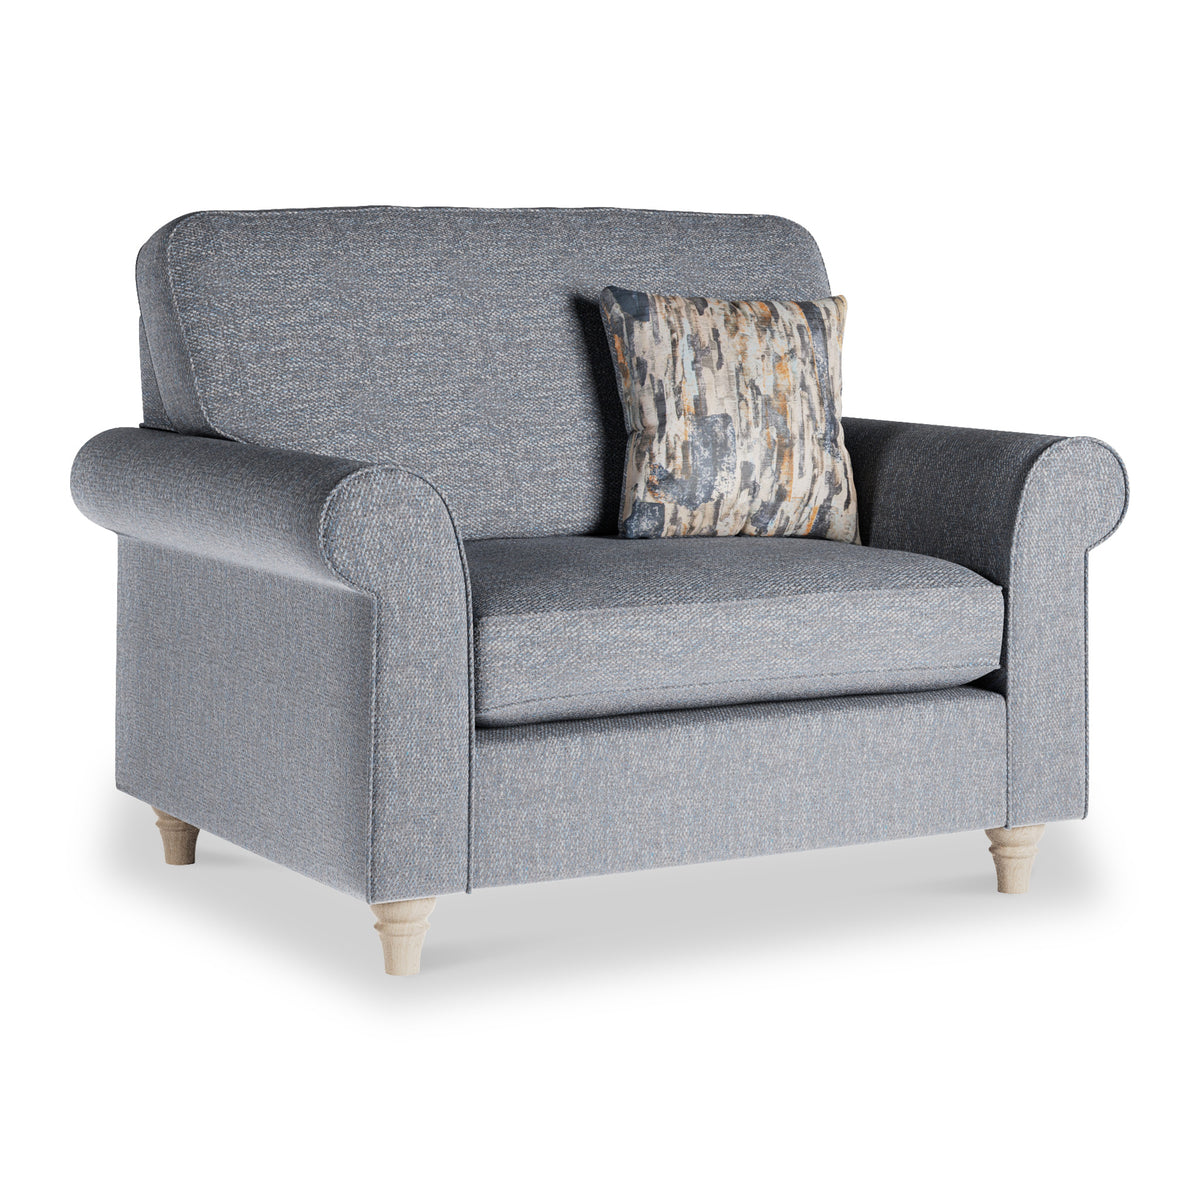 Jude Thunderstorm Snuggle Armchair from Roseland Furniture